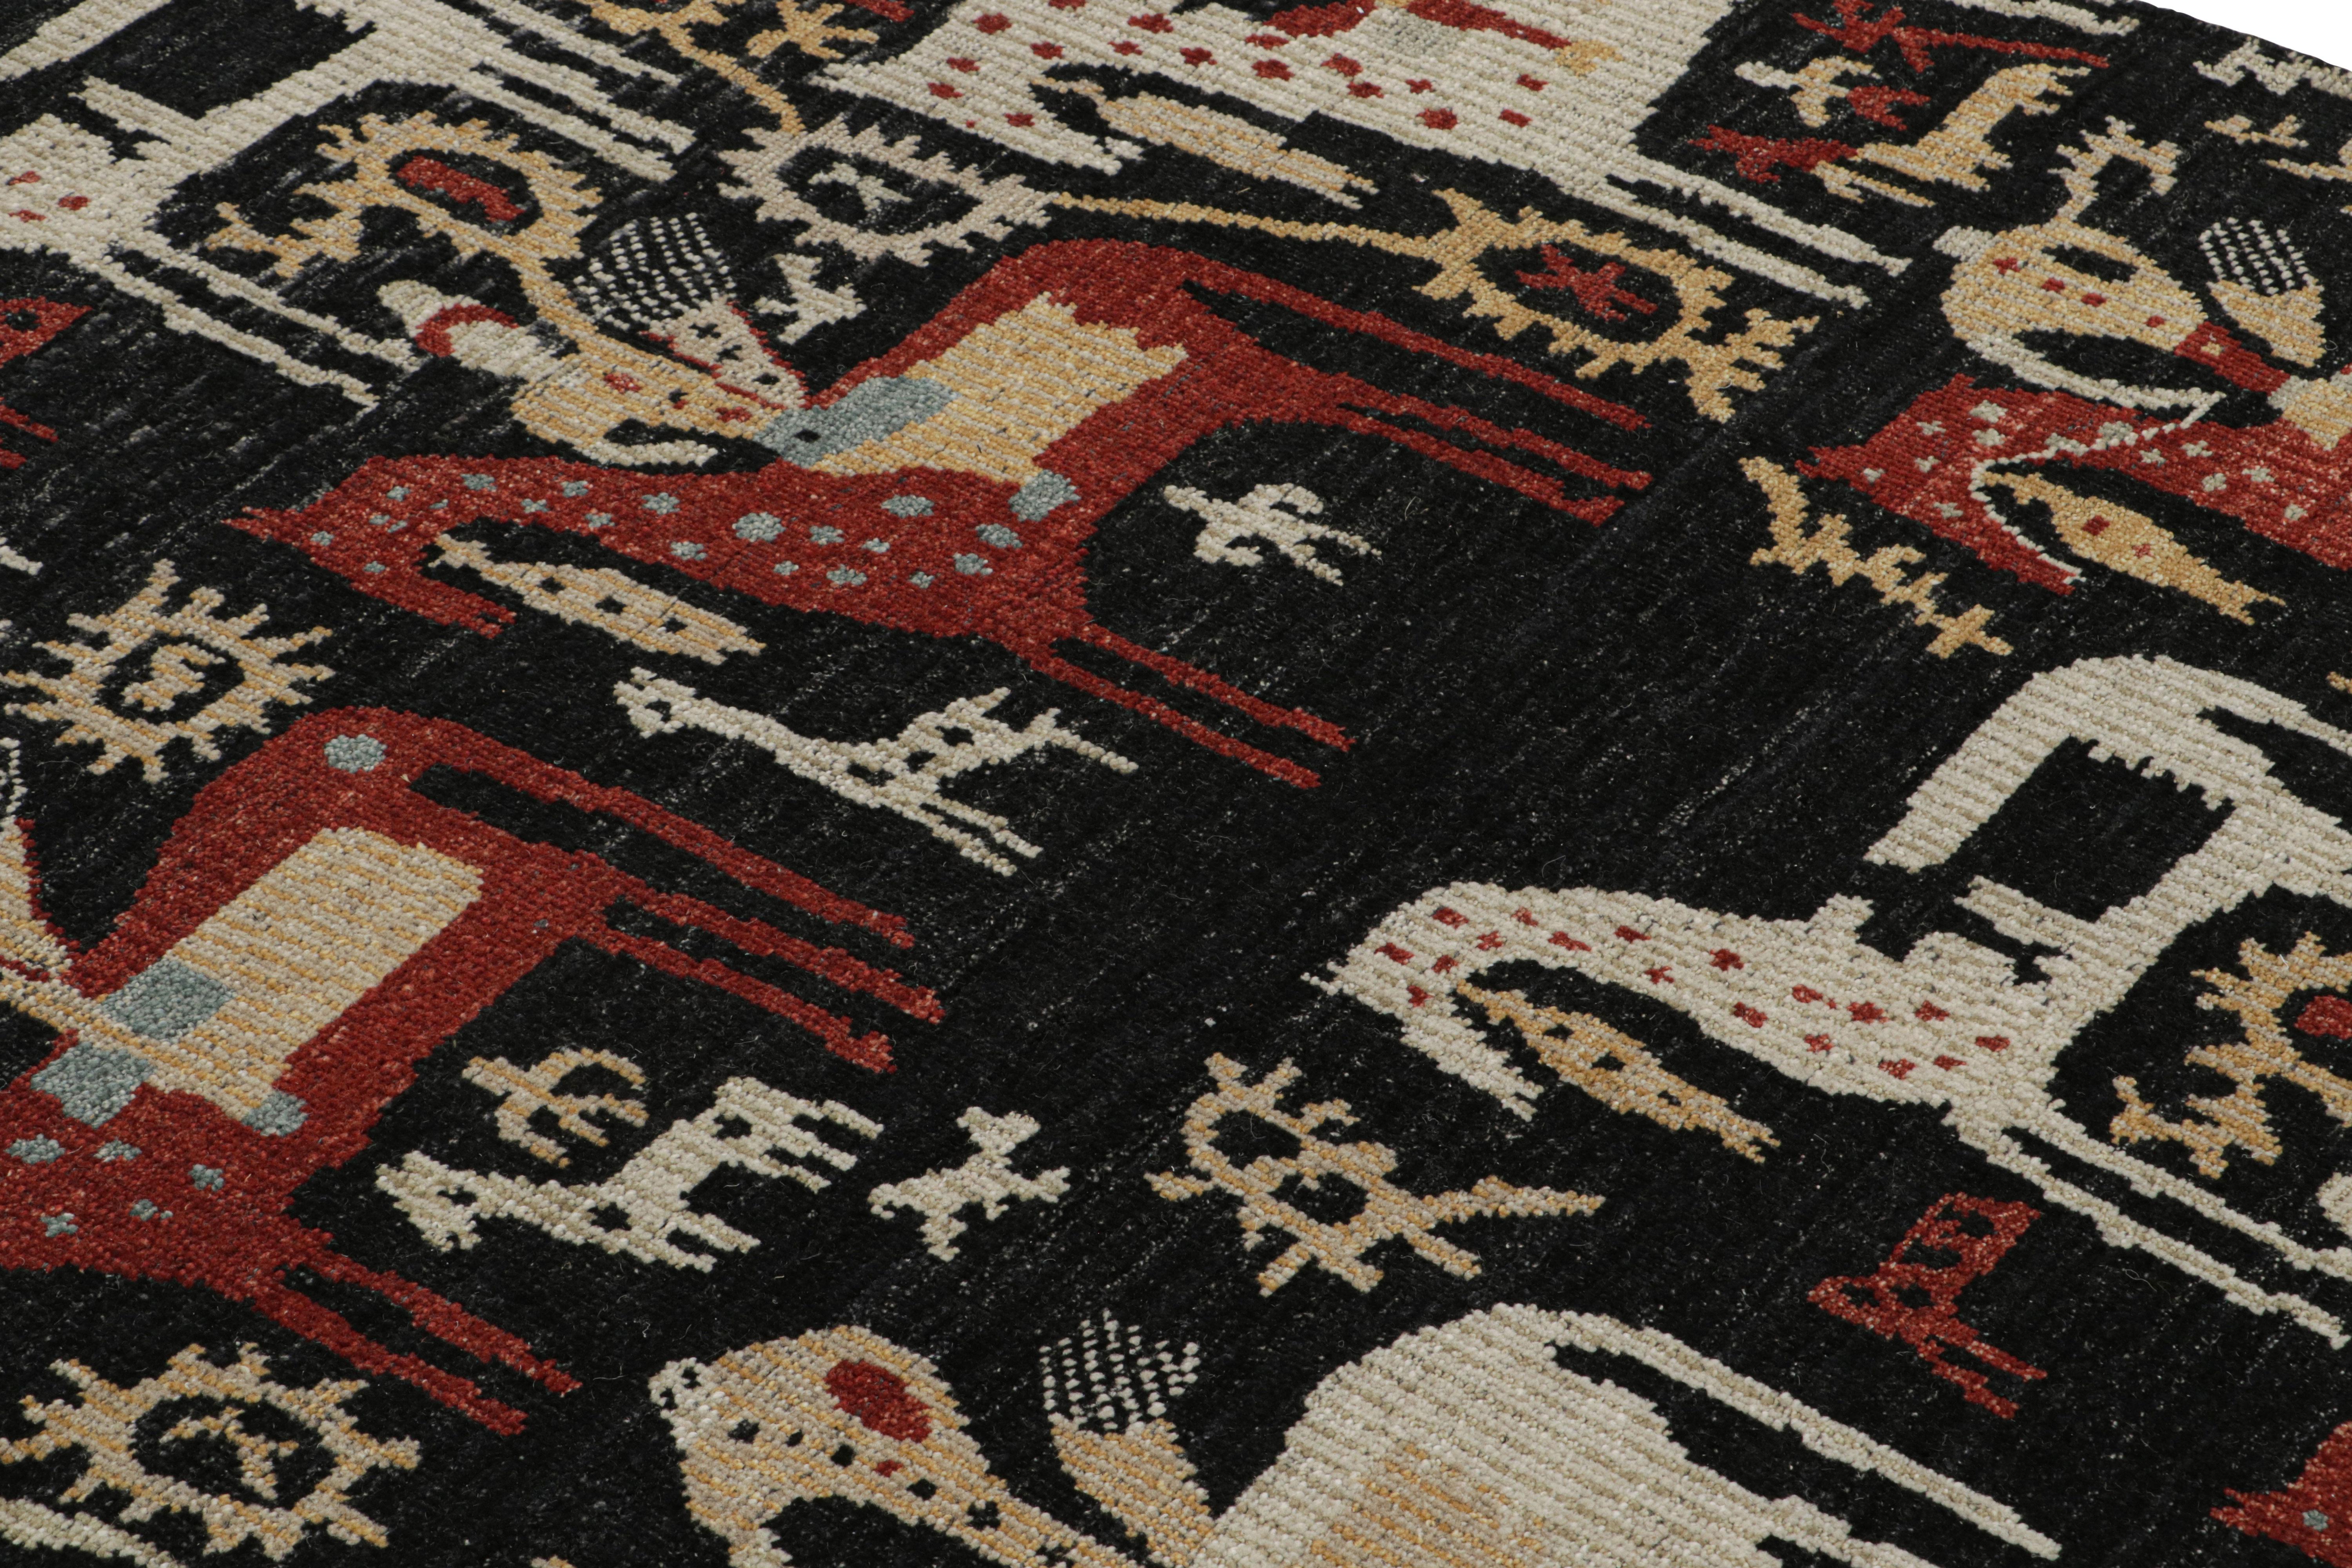 Indian Rug & Kilim’s Caucasian-Style Rug in Black with Horseback Rider Pictorials For Sale